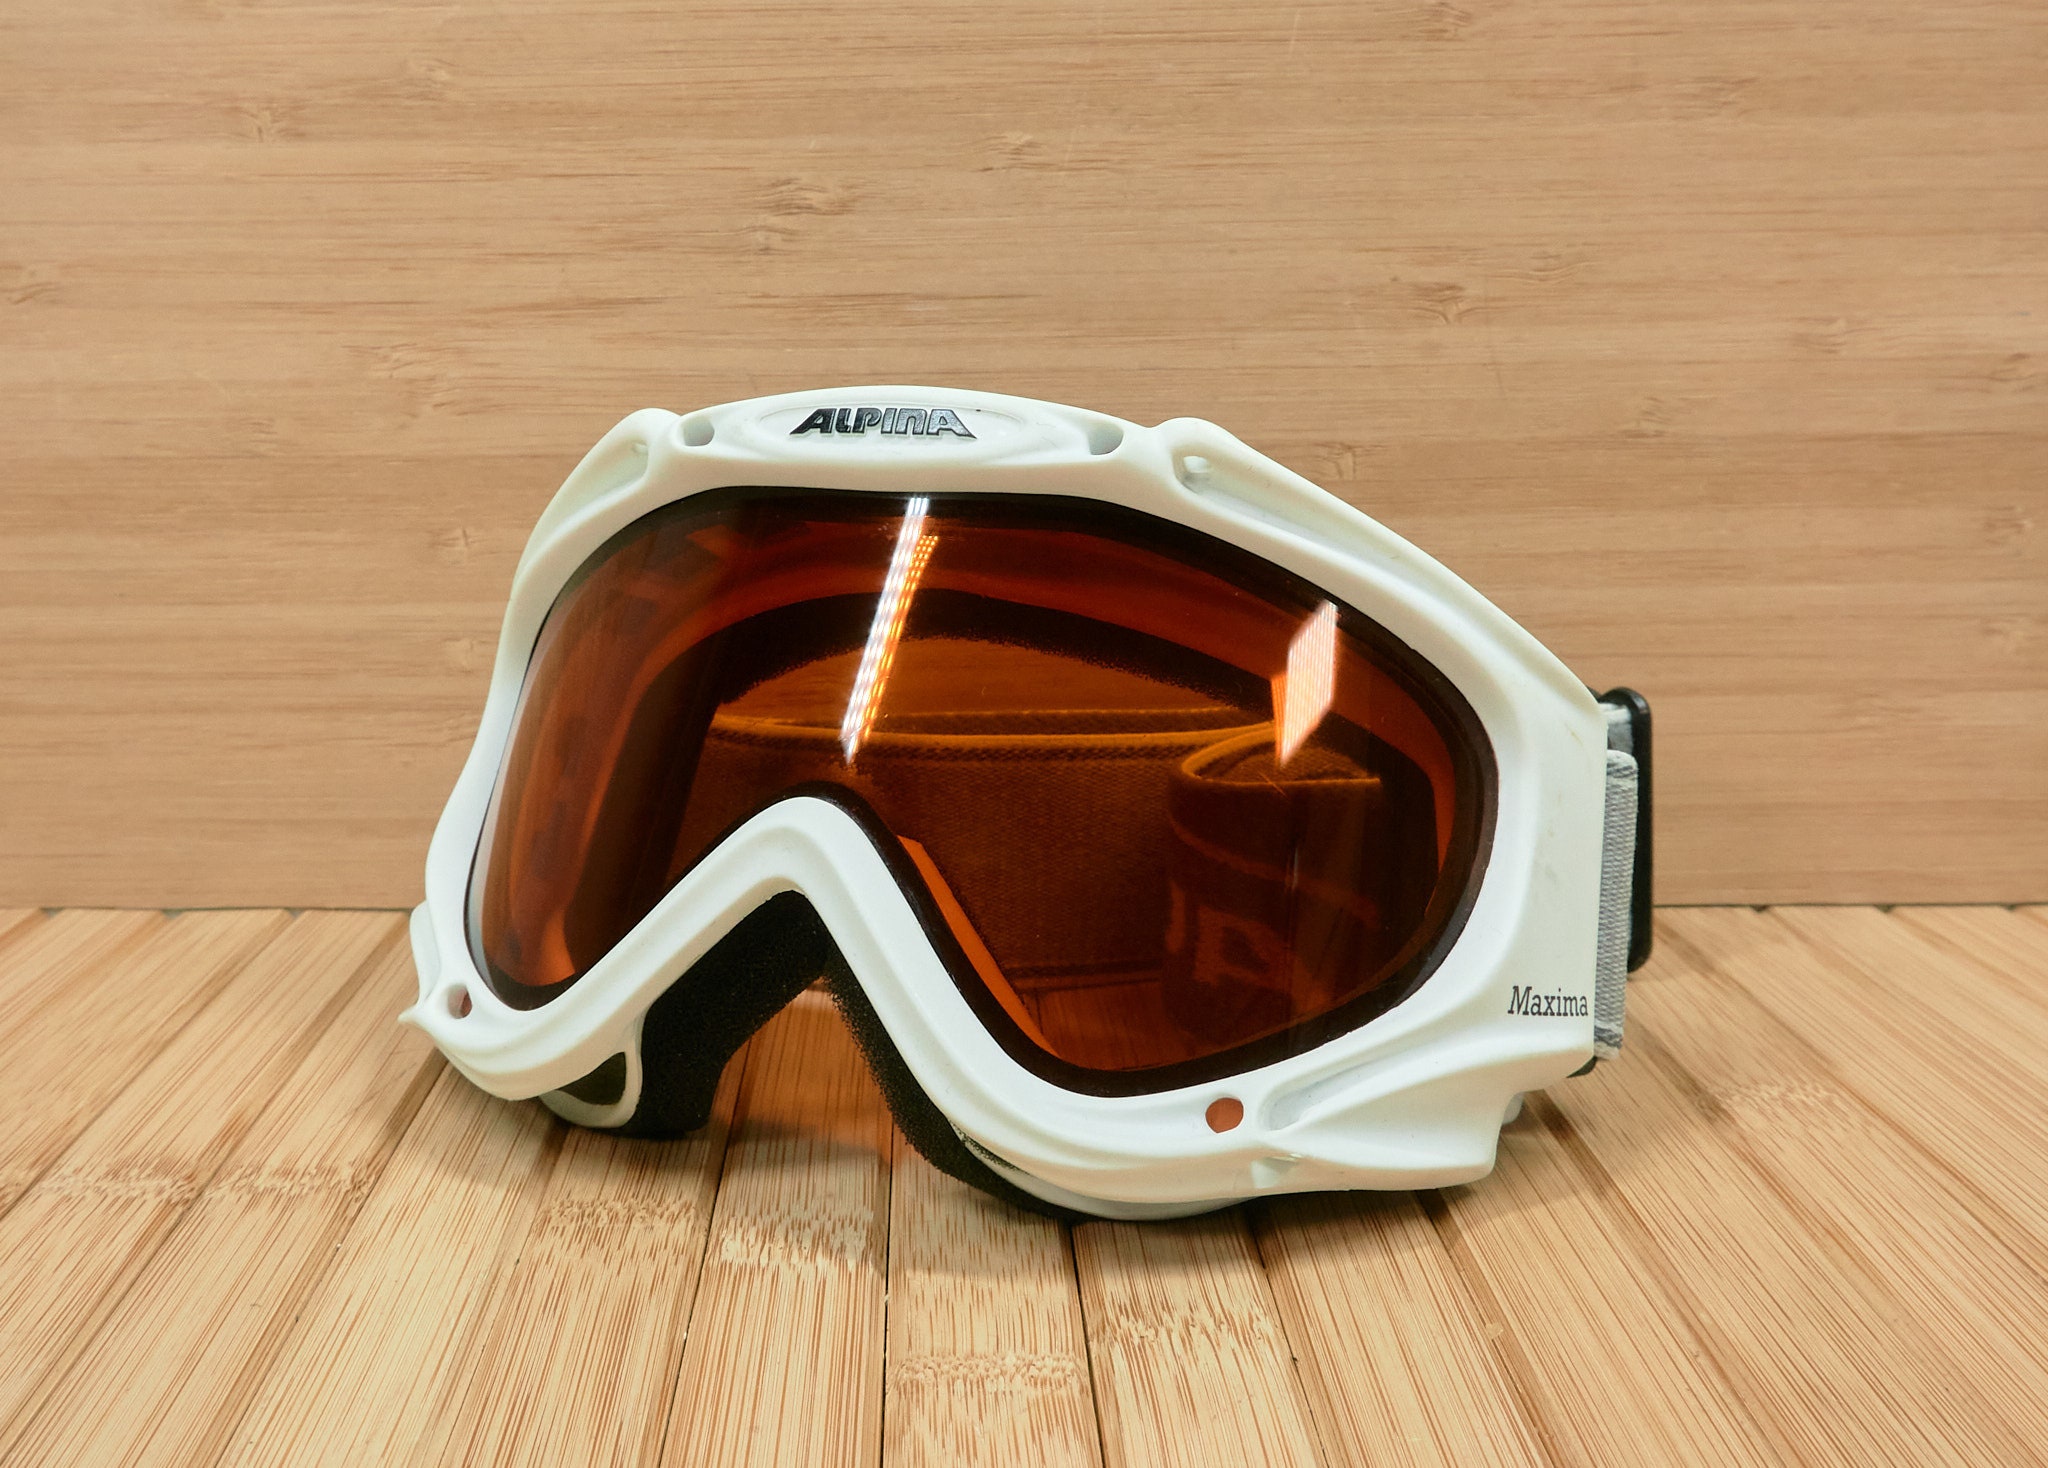 Must have - 1960s Vintage ParaSki Bubble Ski Goggles with green frame and  two sets of lenses.